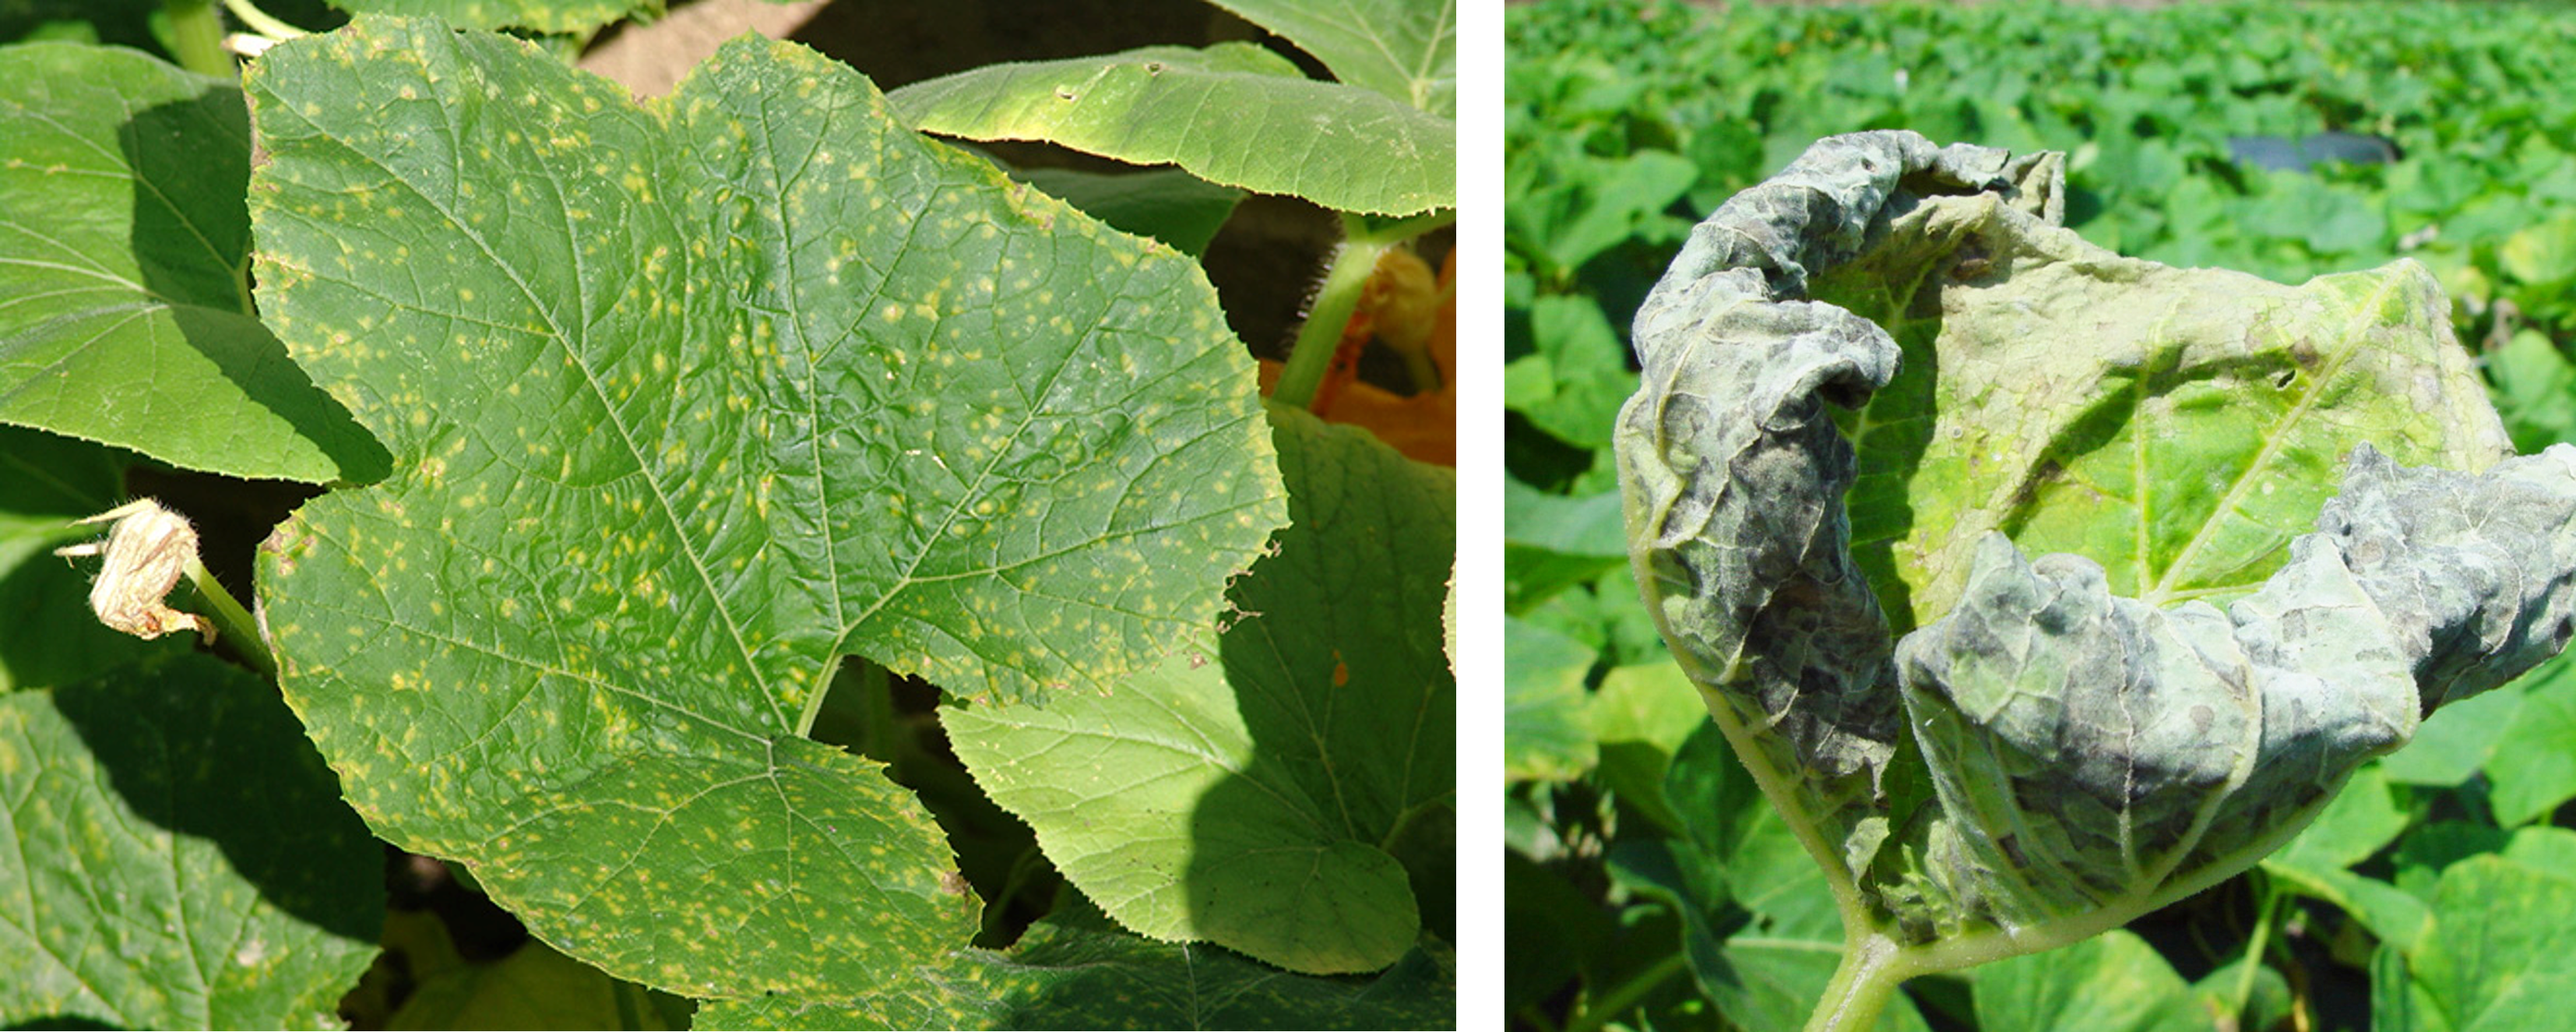 Downy mildew, a common disease in summer squash, can advance quickly from tiny lesions (left) to severe damage (right) under disease-favorable environmental conditions. 